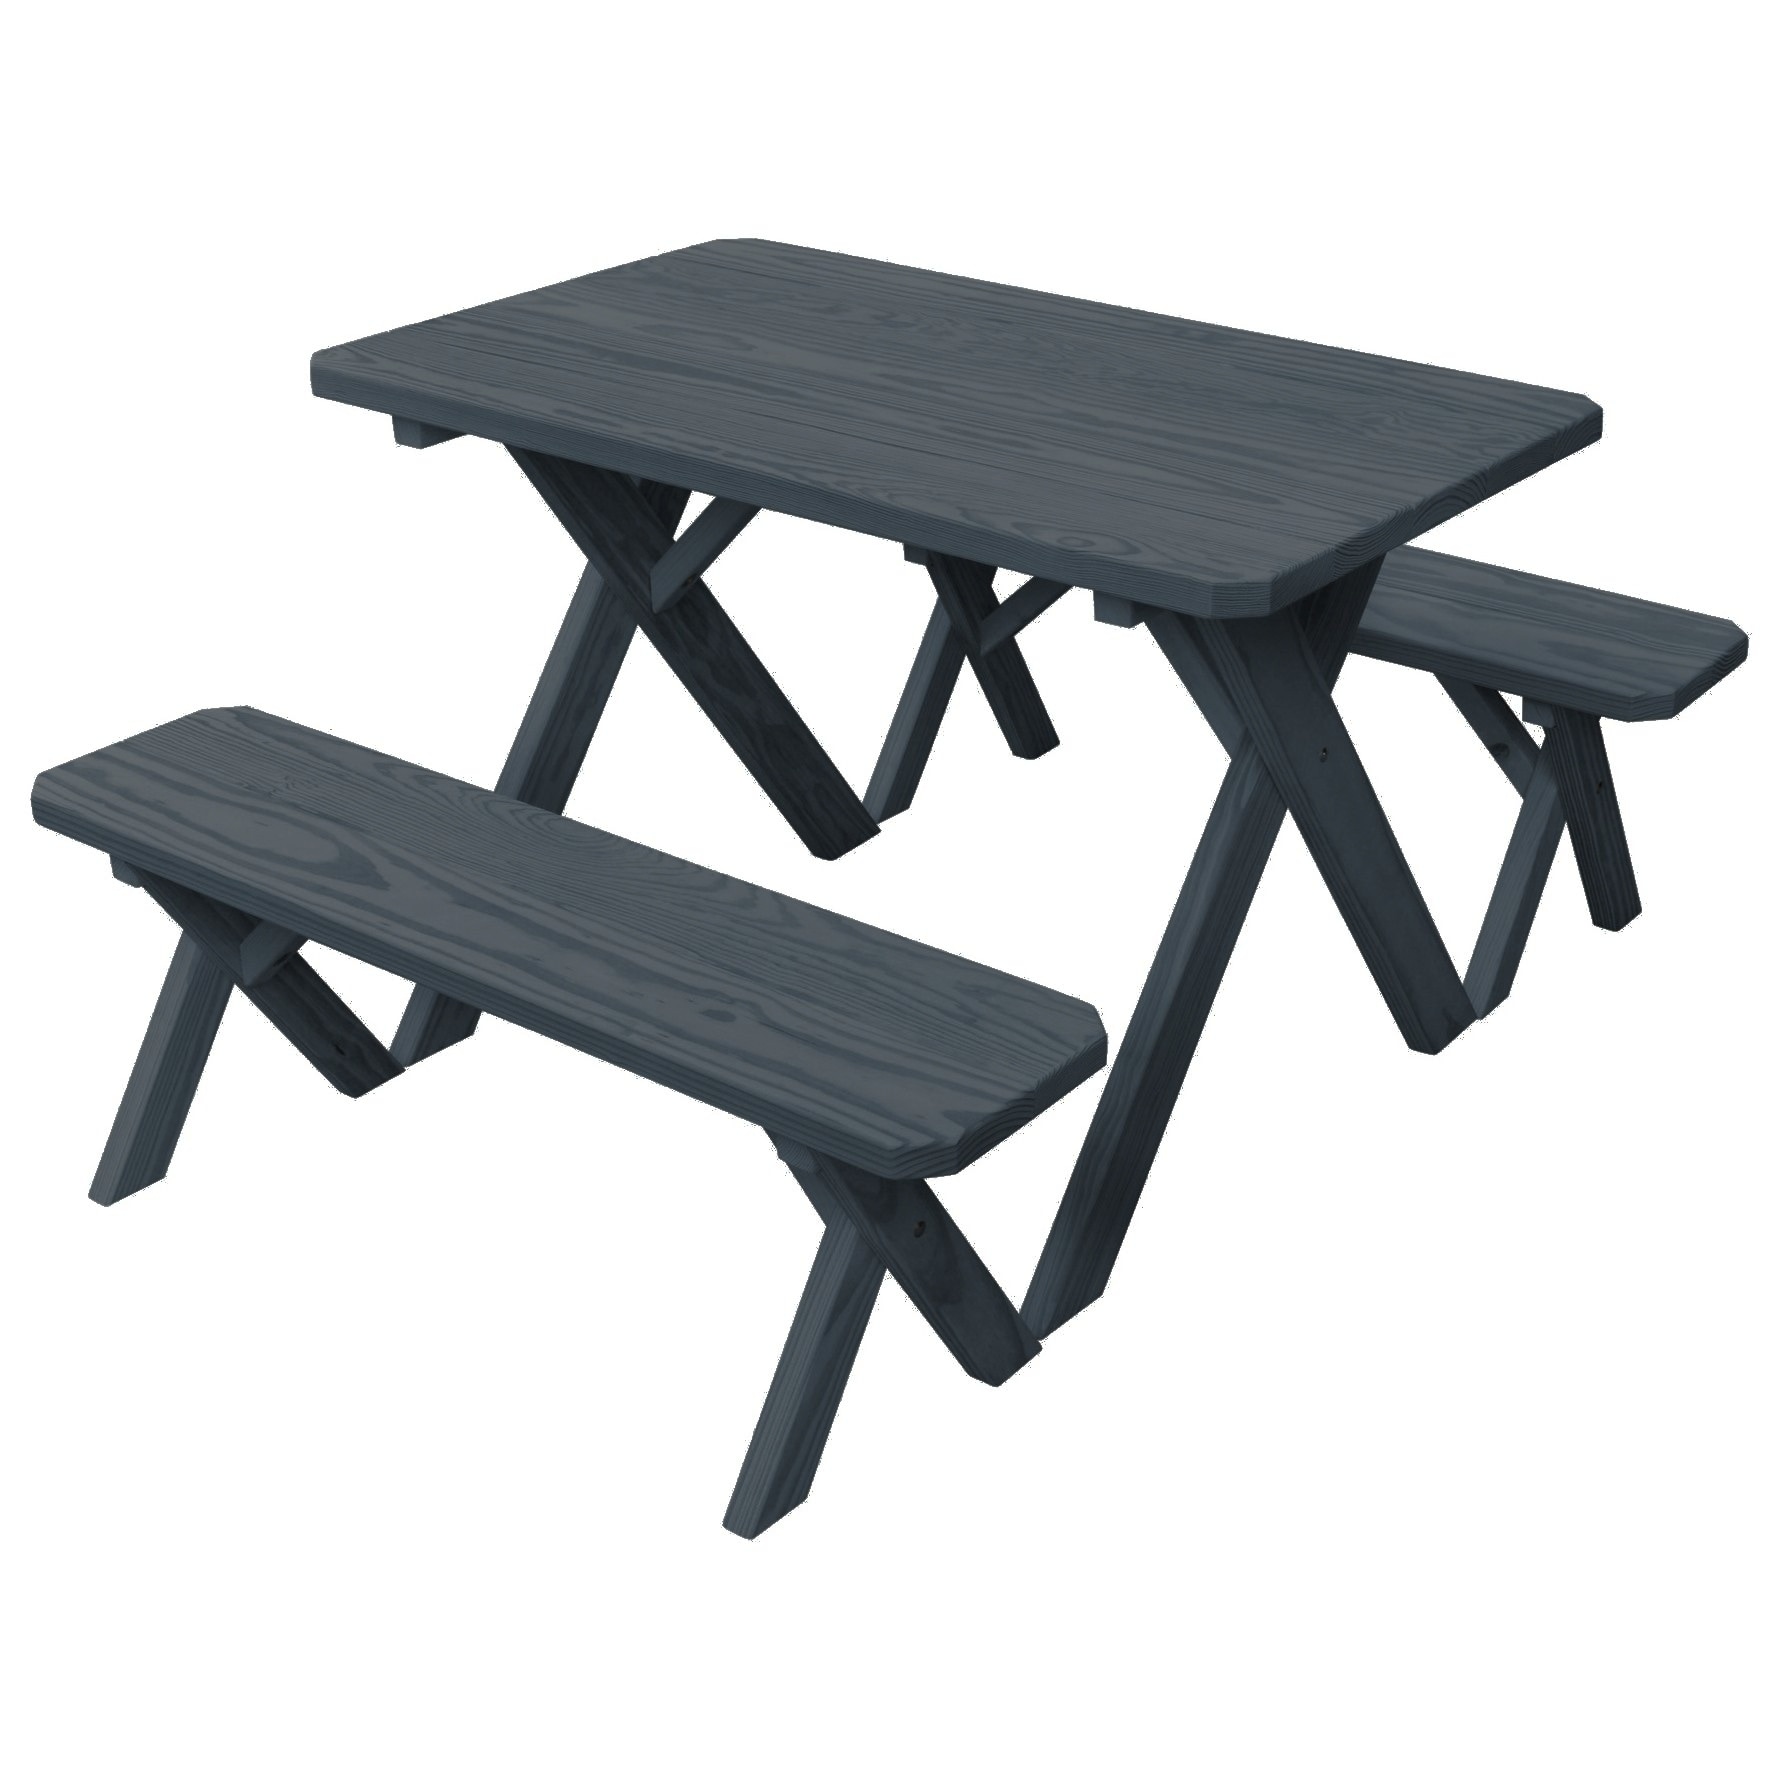 Pine 4 Cross-leg Picnic Table With 2 Benches